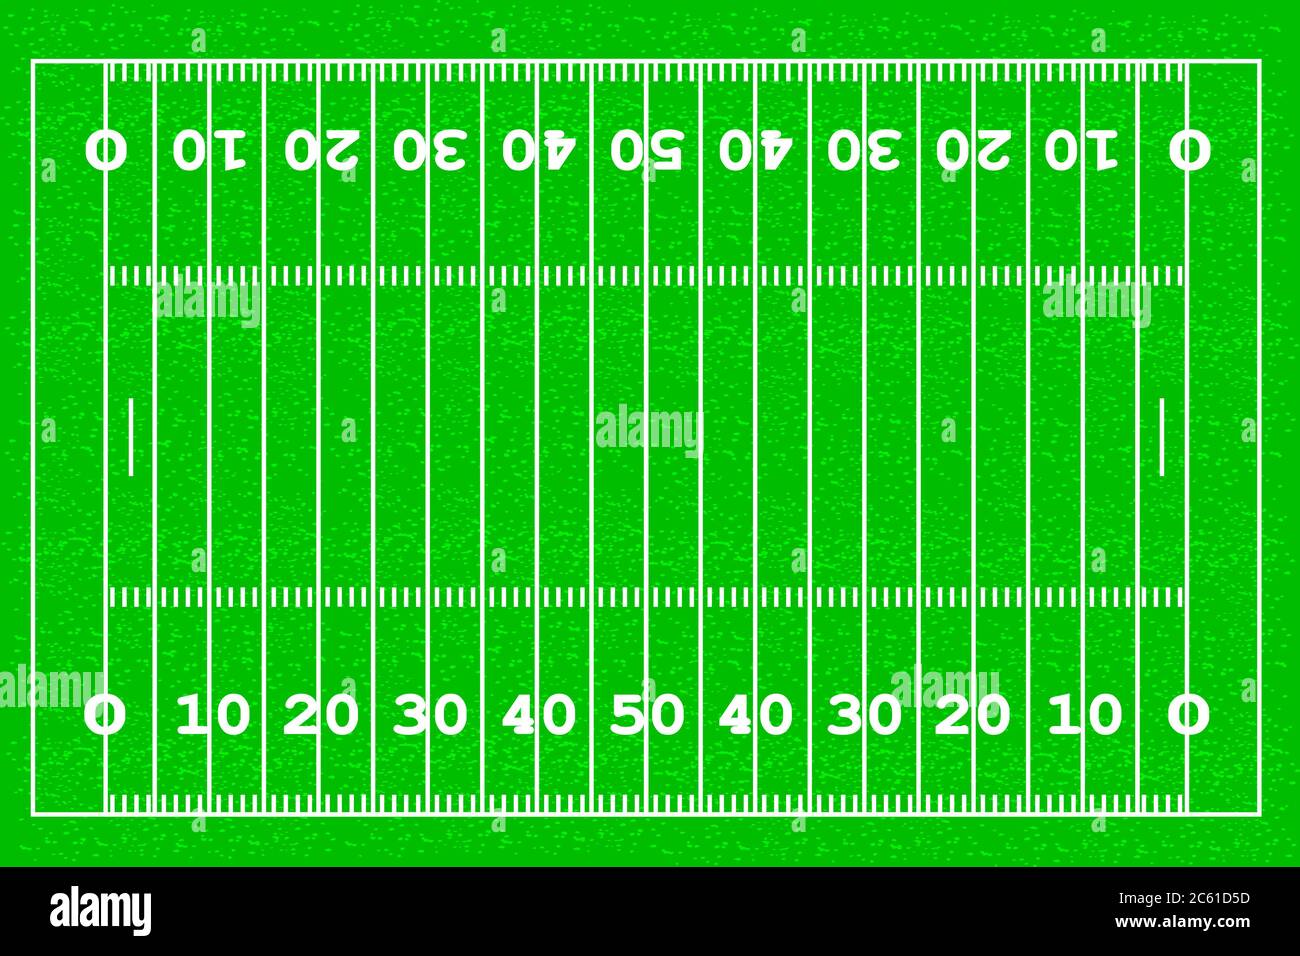 American football field background Rugby grass field vector illustration layout Stock Vector